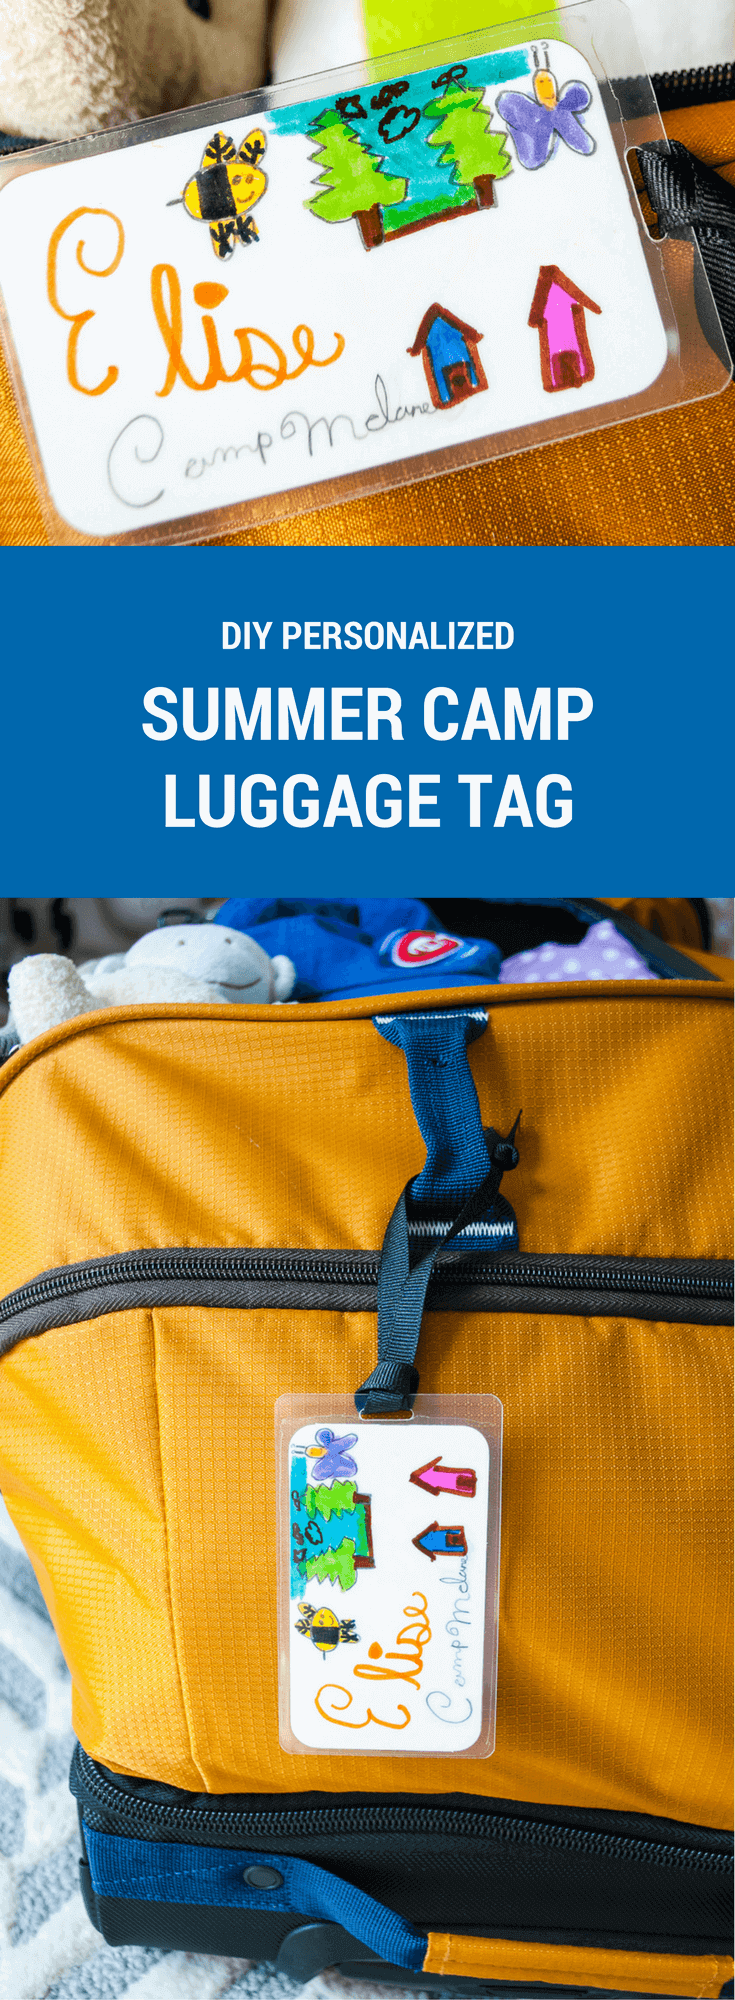 Easy DIY summer camp luggage tag. Super cute and less than $2 to make in less than 30 minutes!